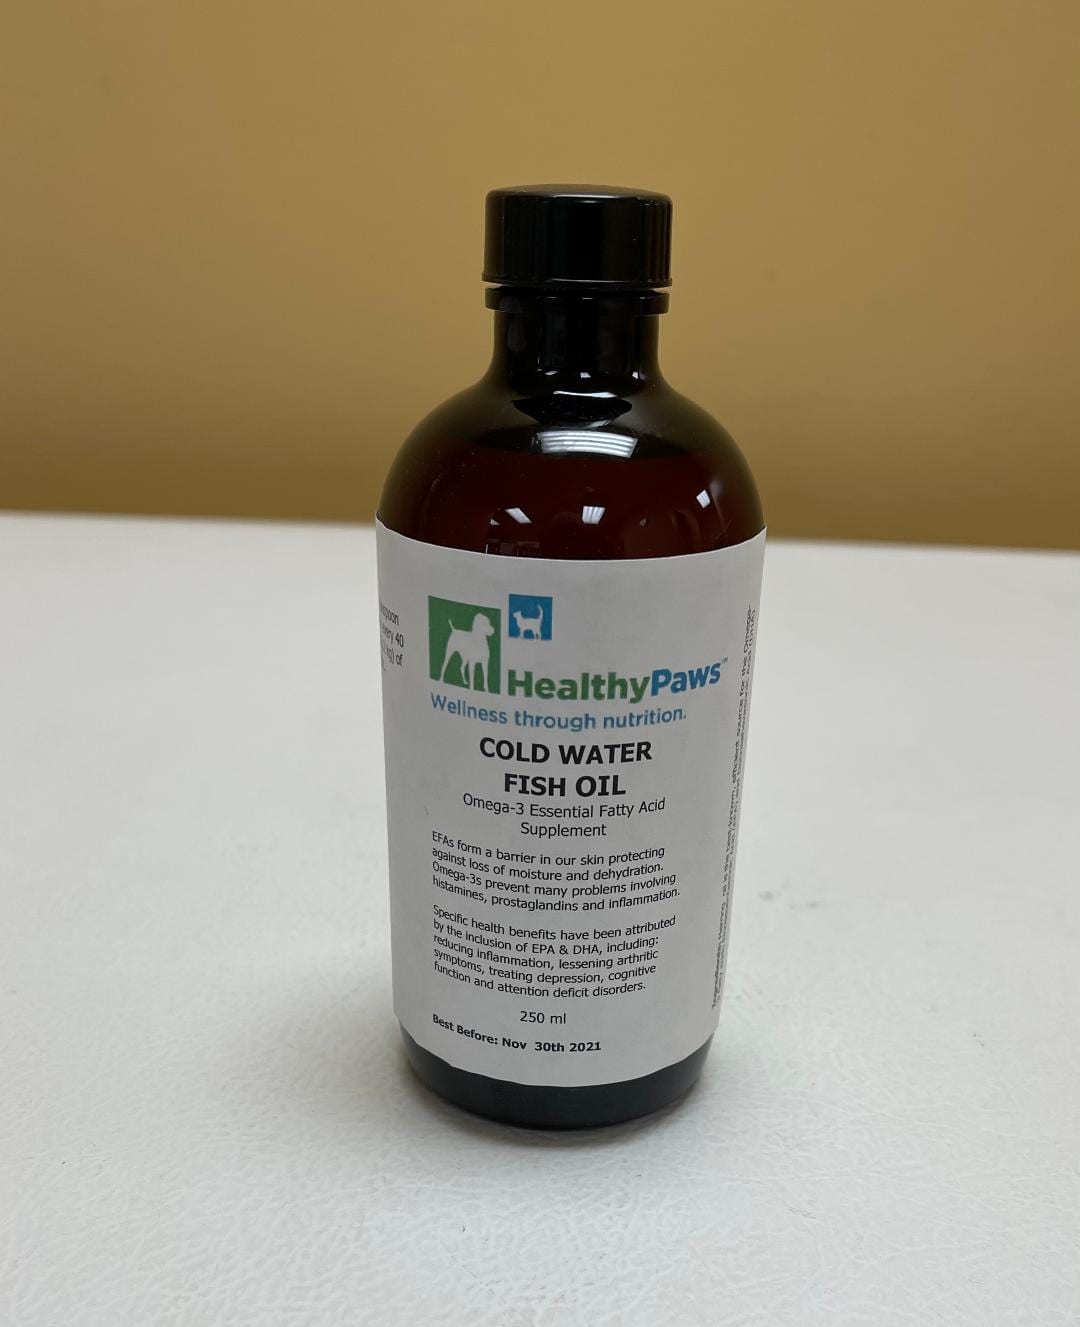 Healthy paws Cold Water Fish Oil